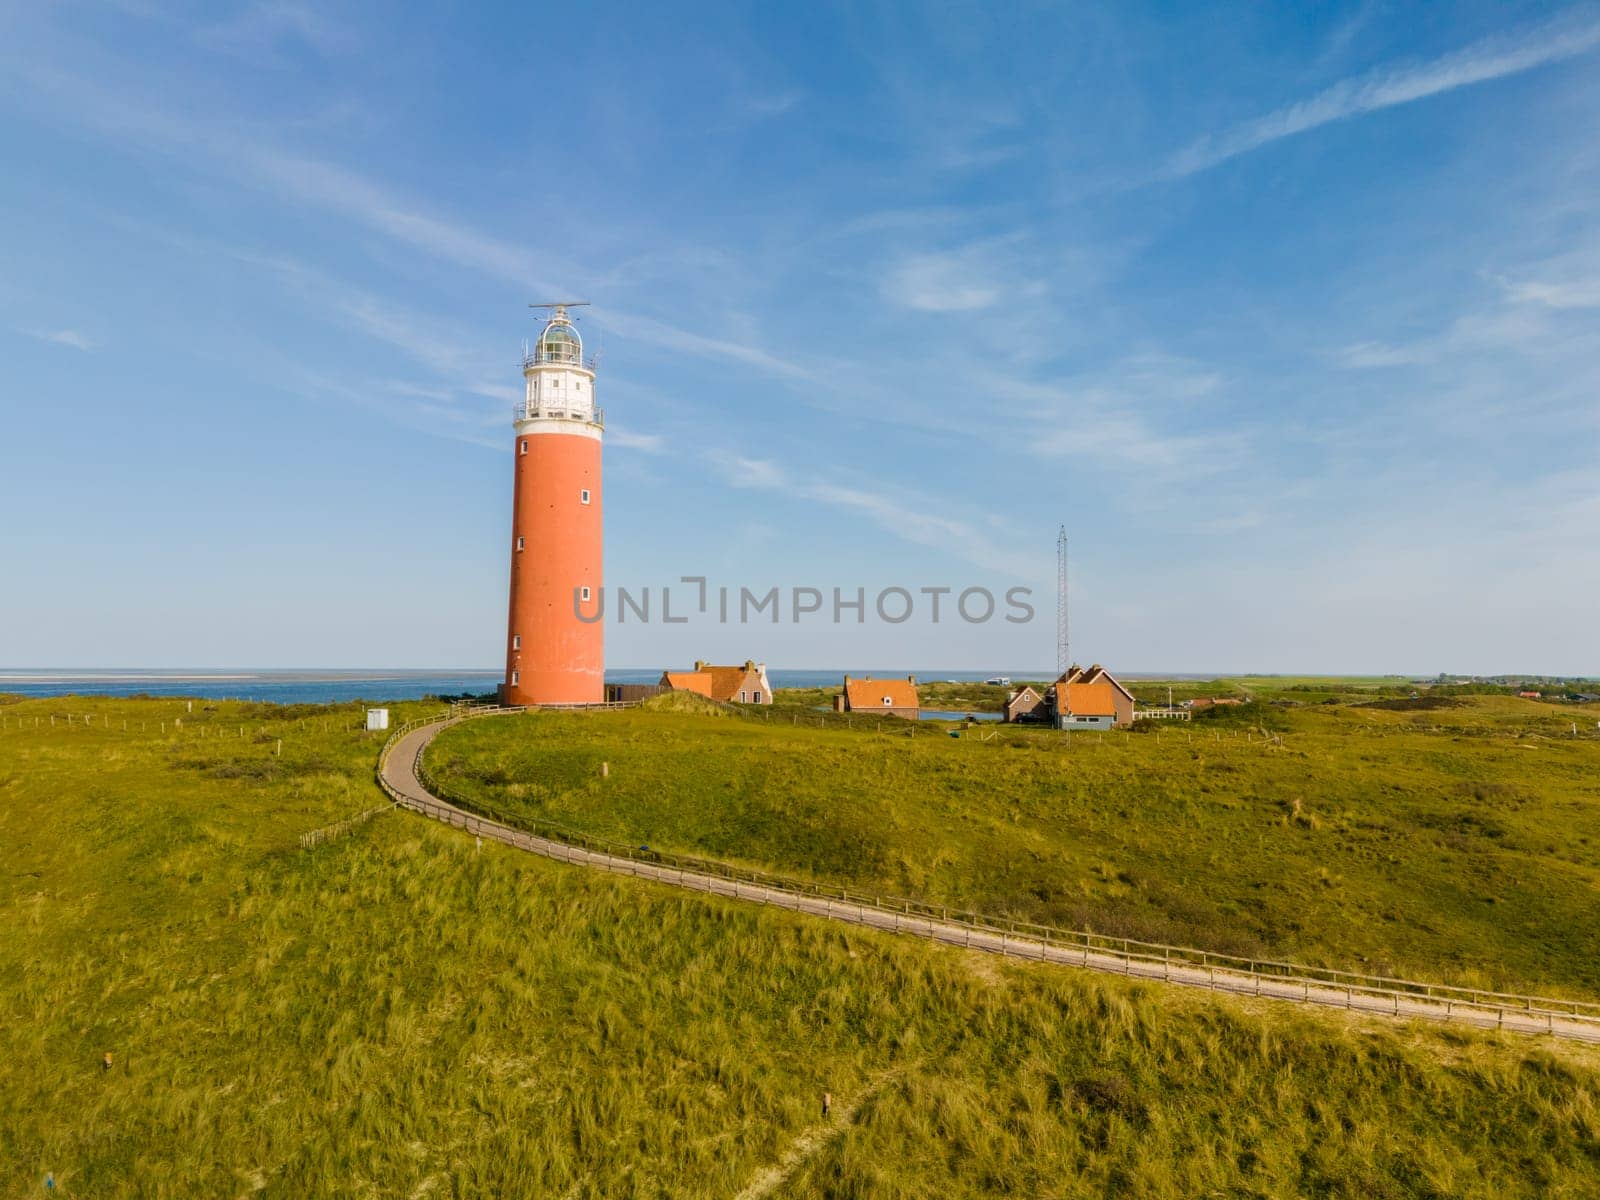 A majestic lighthouse stands tall on a grassy field, casting a watchful eye over the Texel landscape below.